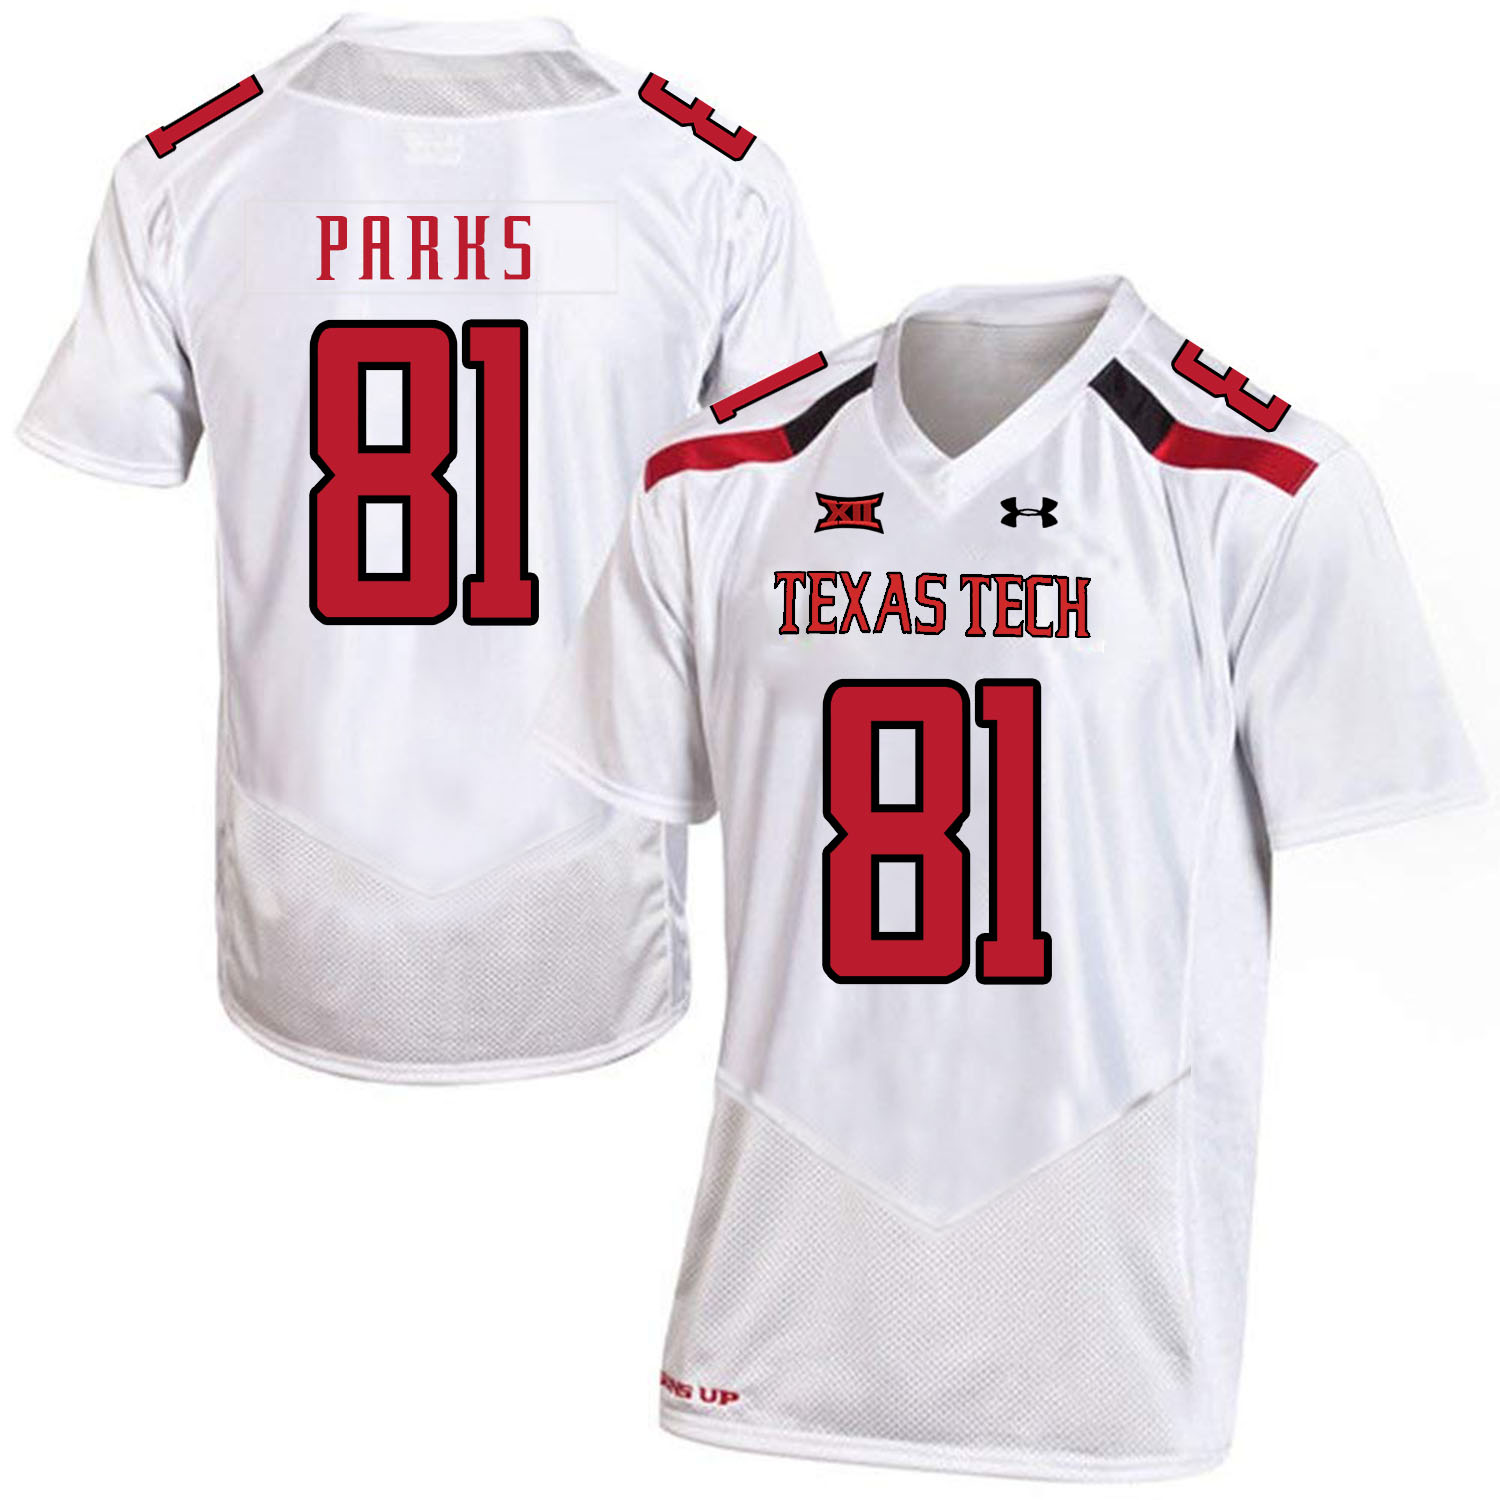 Texas Tech Red Raiders 81 Dave Parks White College Football Jersey